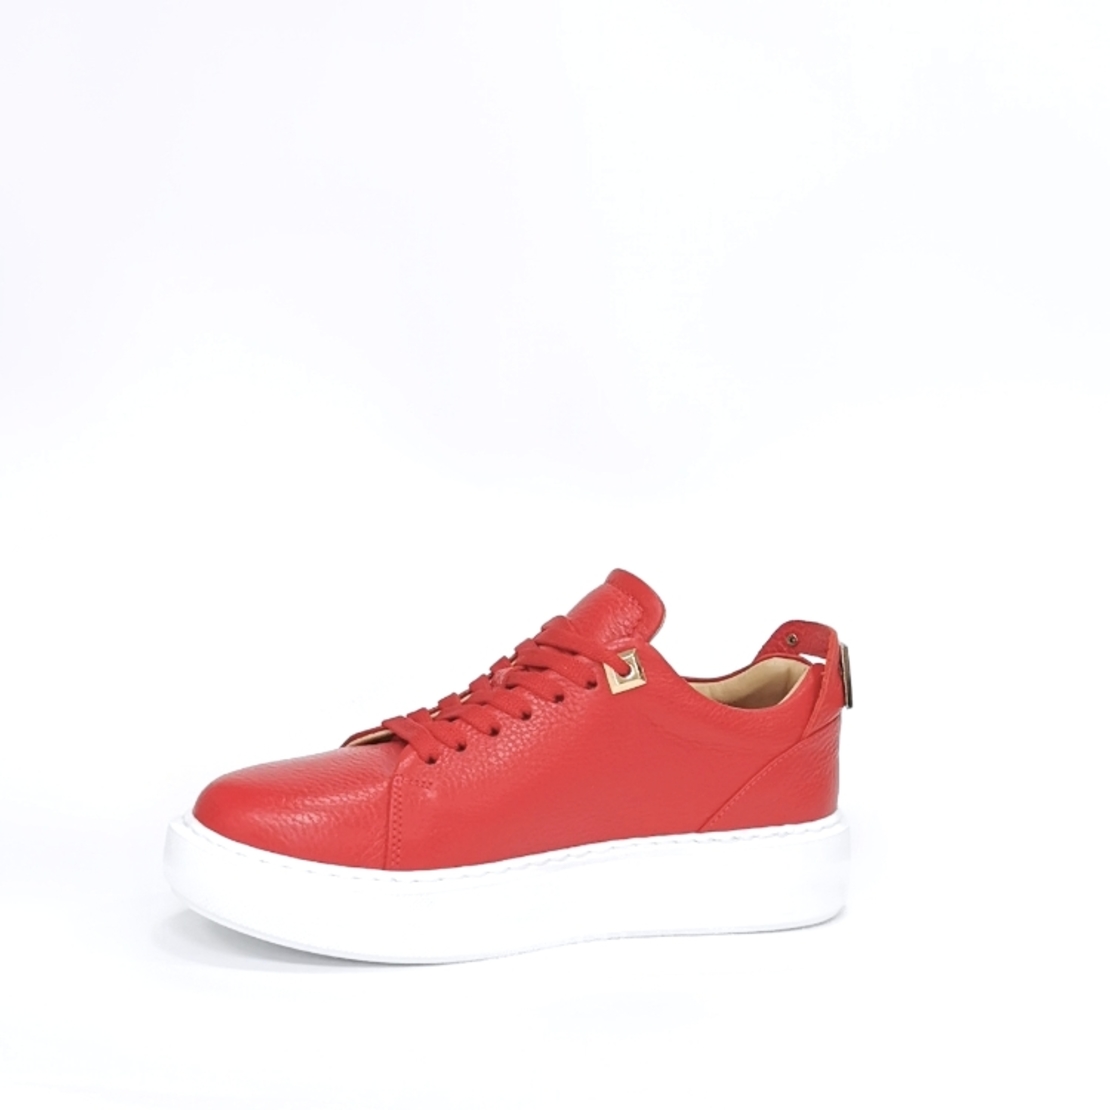 Women's sneaker made of natural leather in red color with anatomical insole/7785